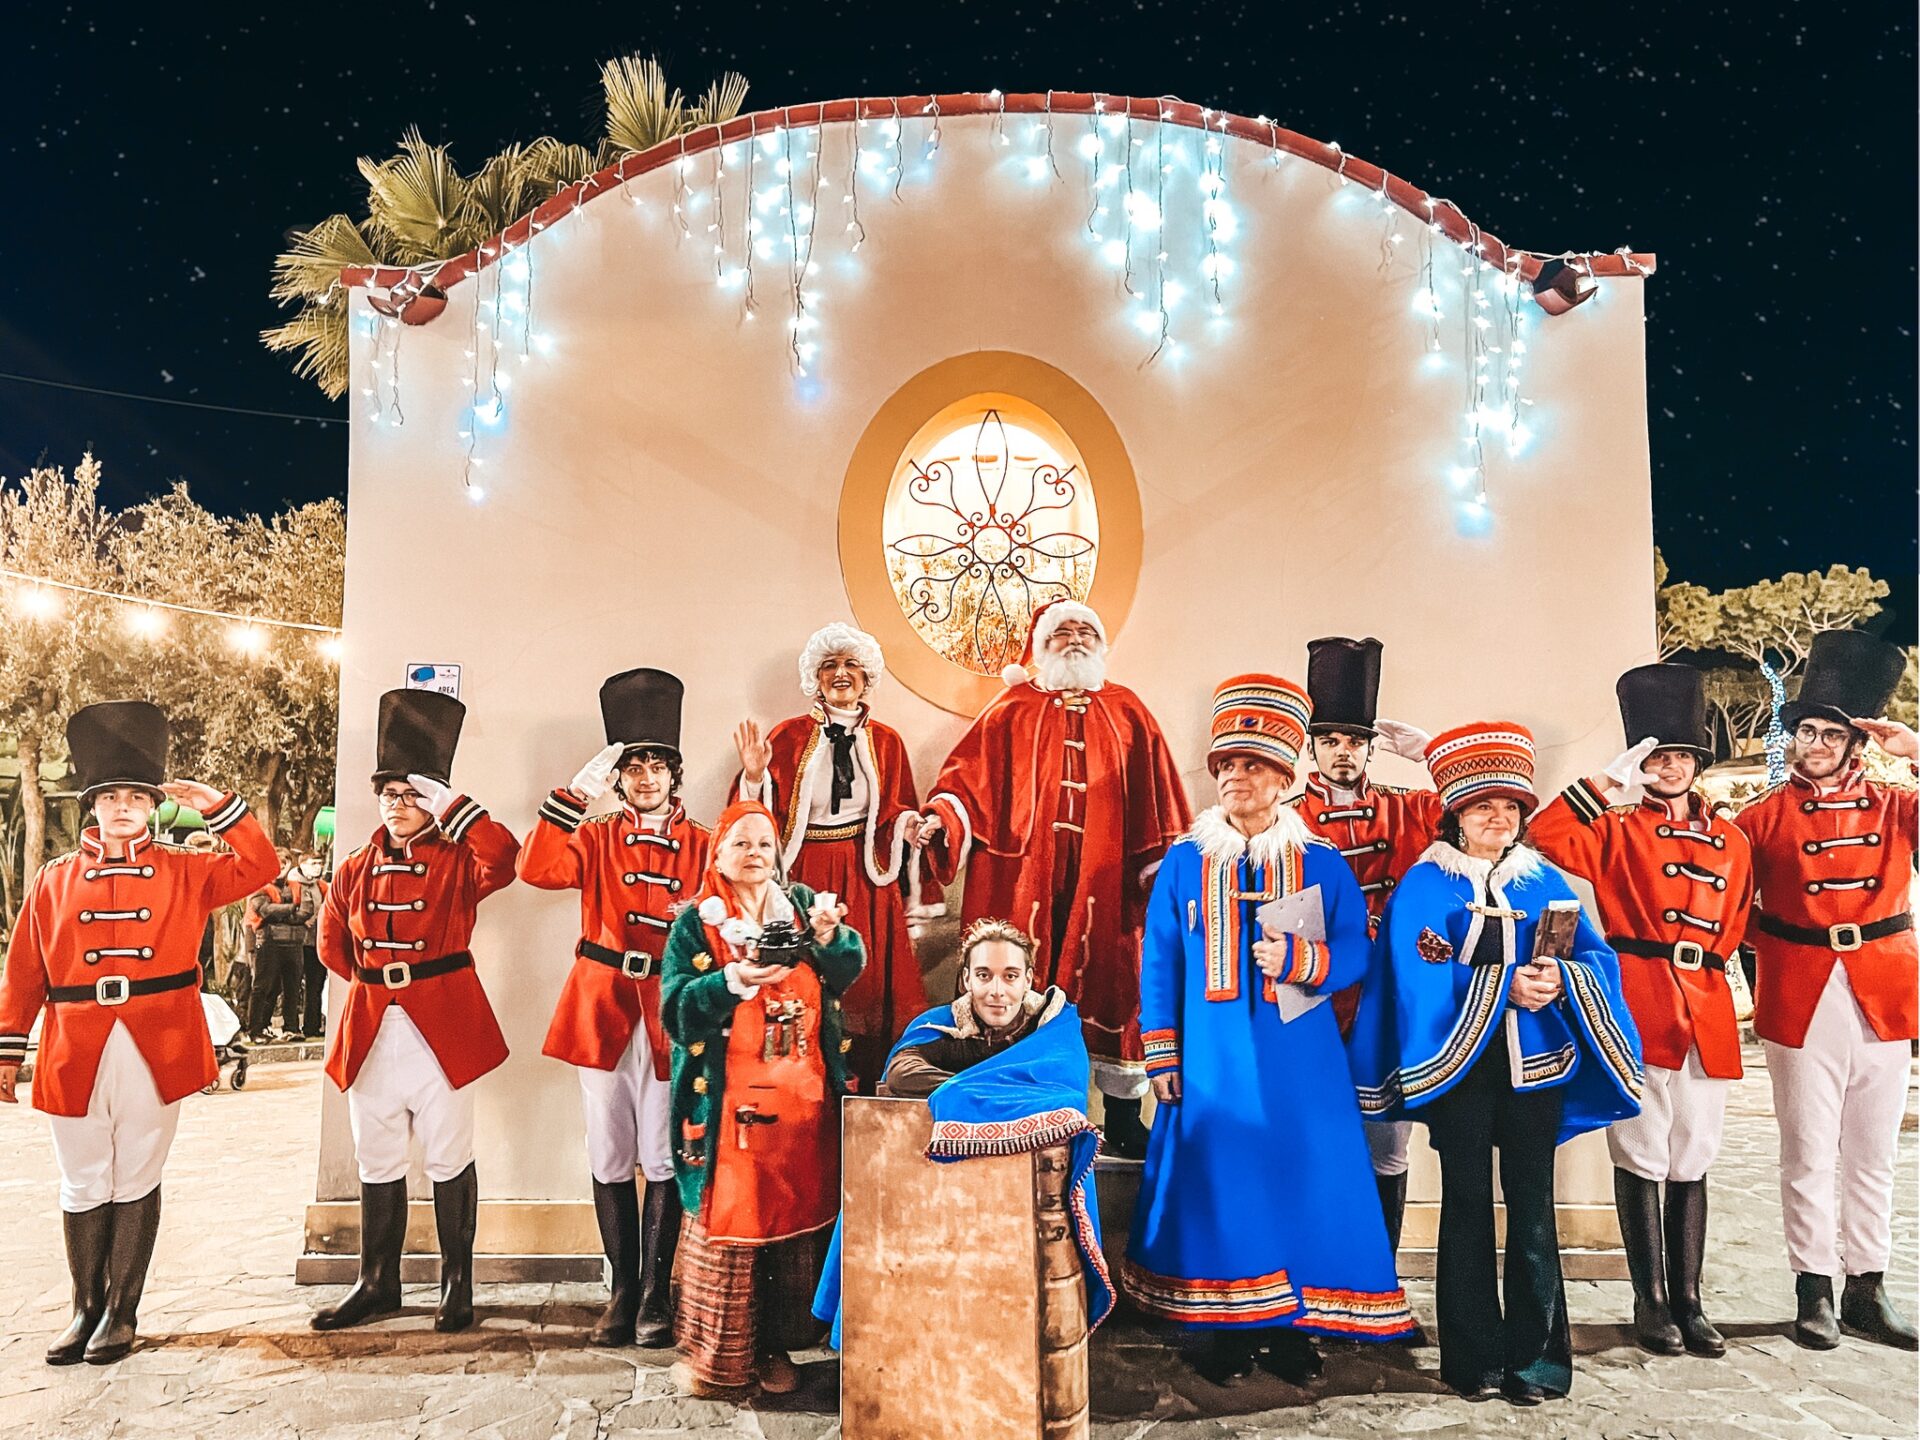 valle natale torre greco